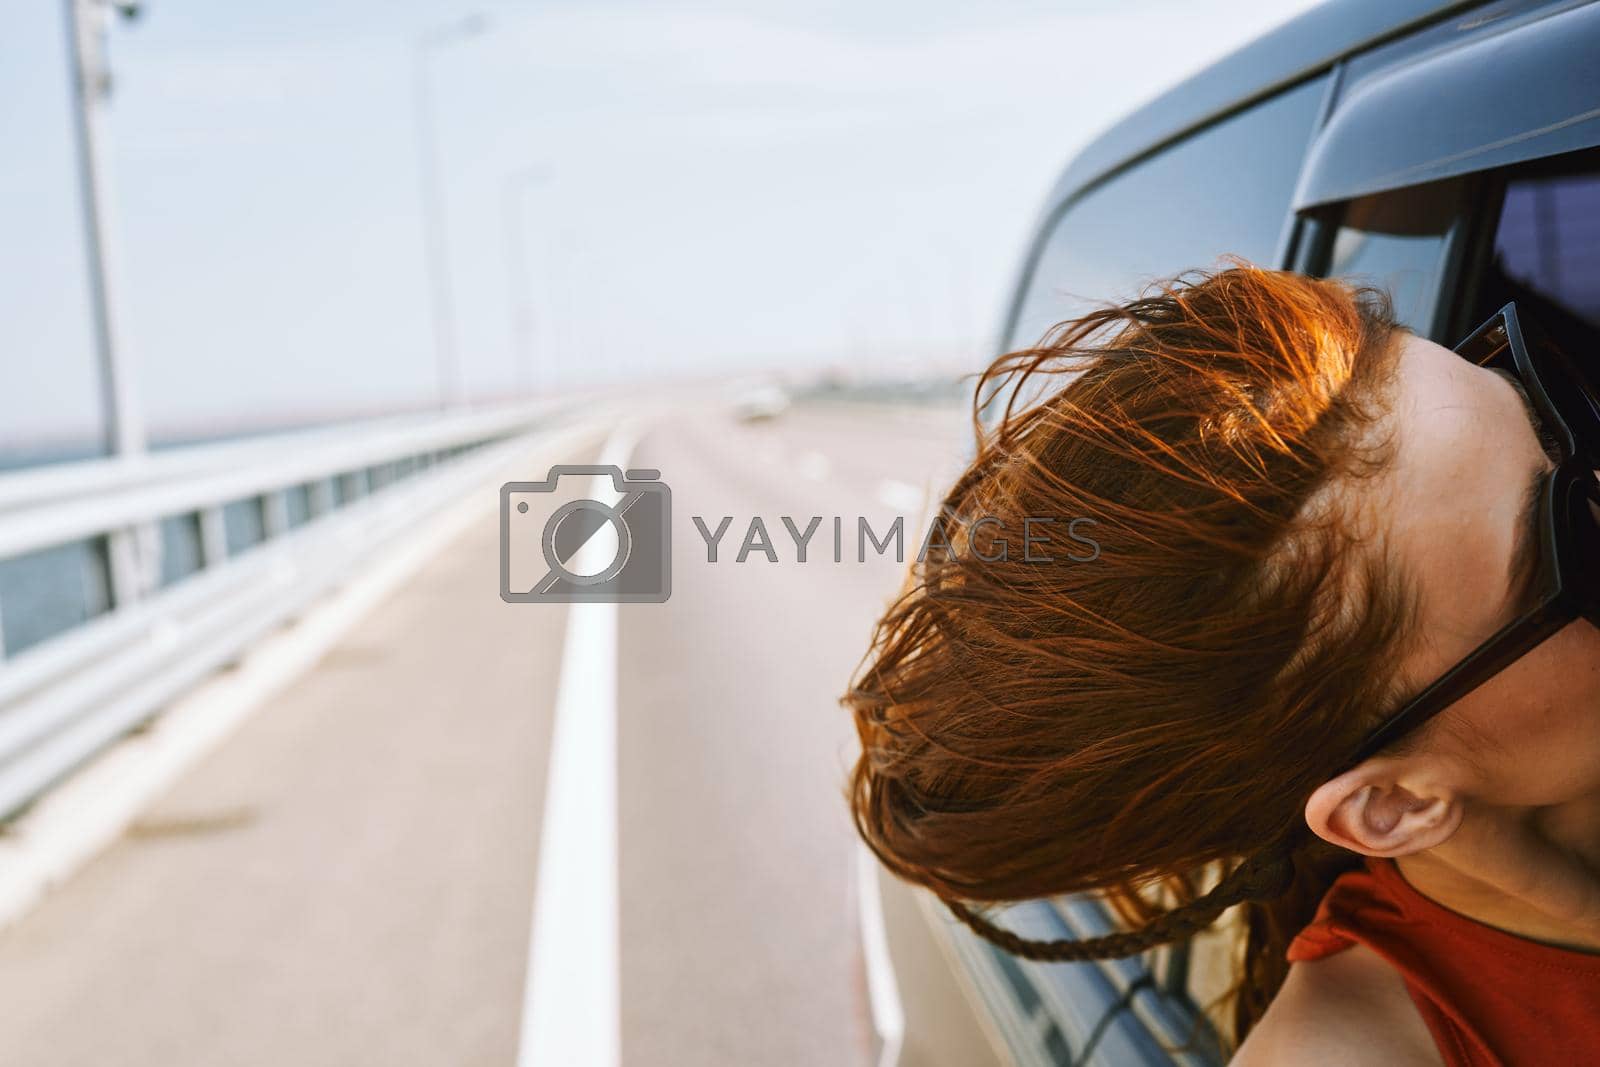 woman looking out of car window wearing sunglasses travel lifestyle. High quality photo